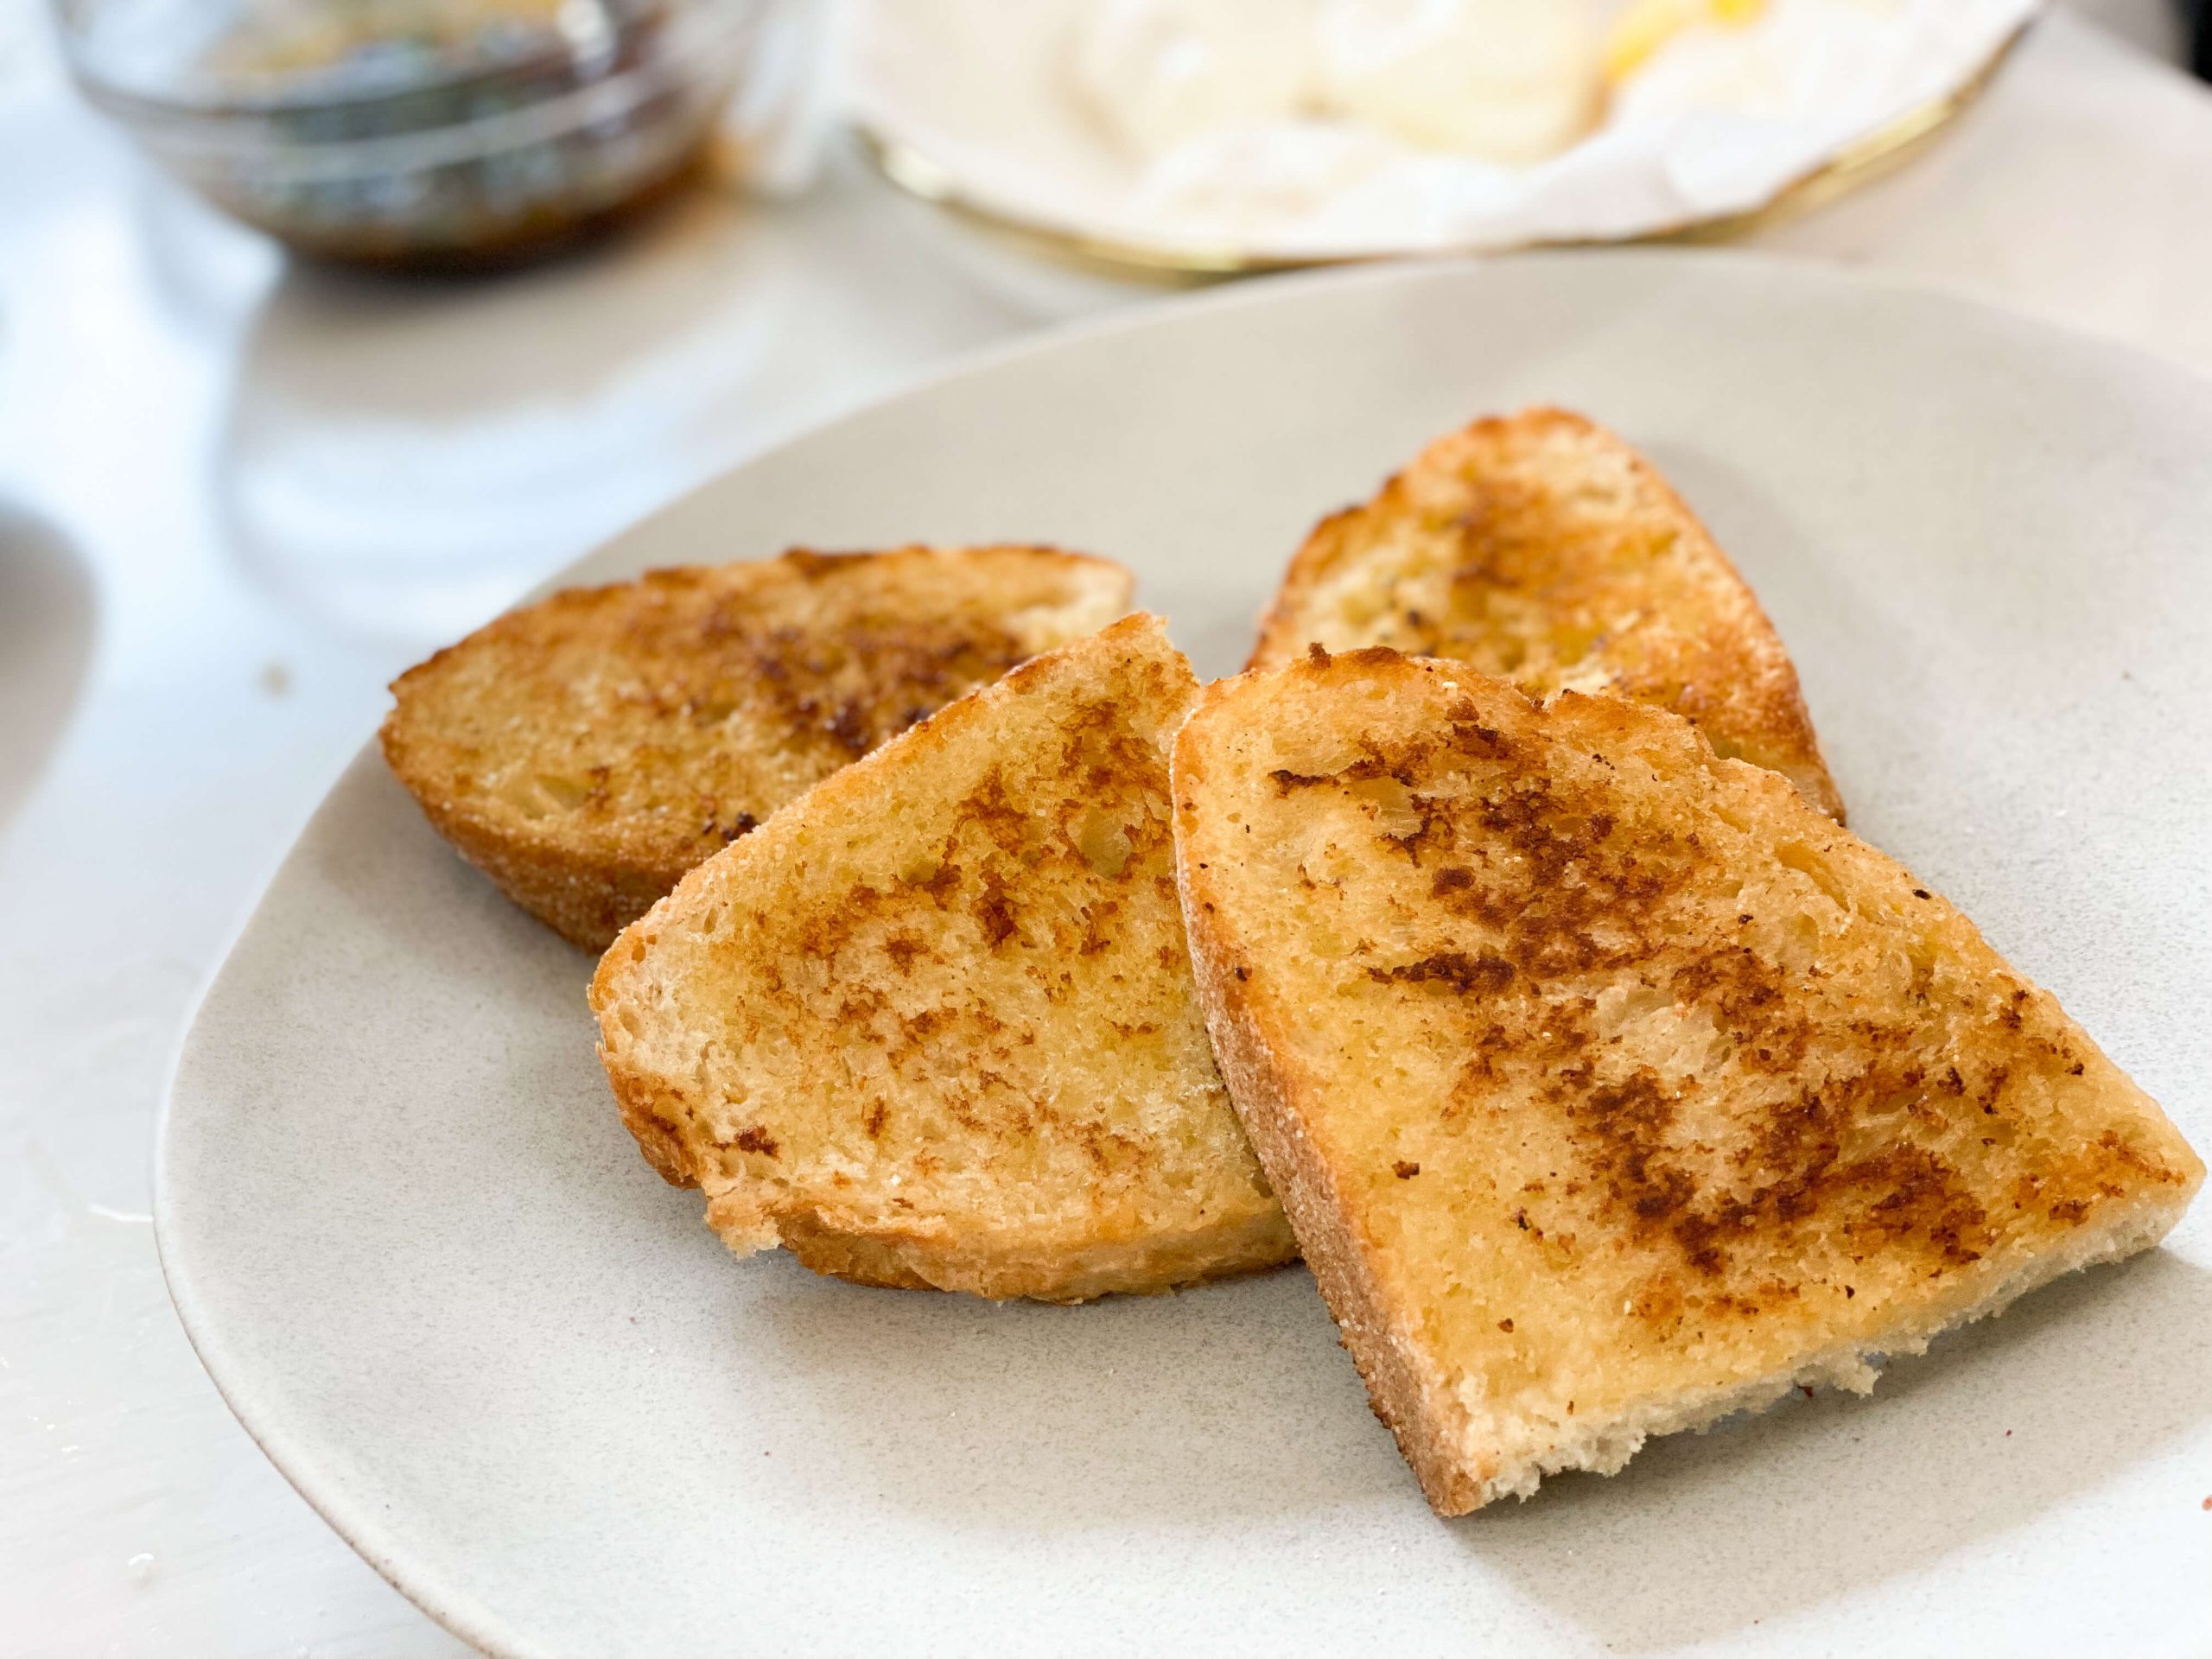 Toasted bread for dipping in my Turkish eggs